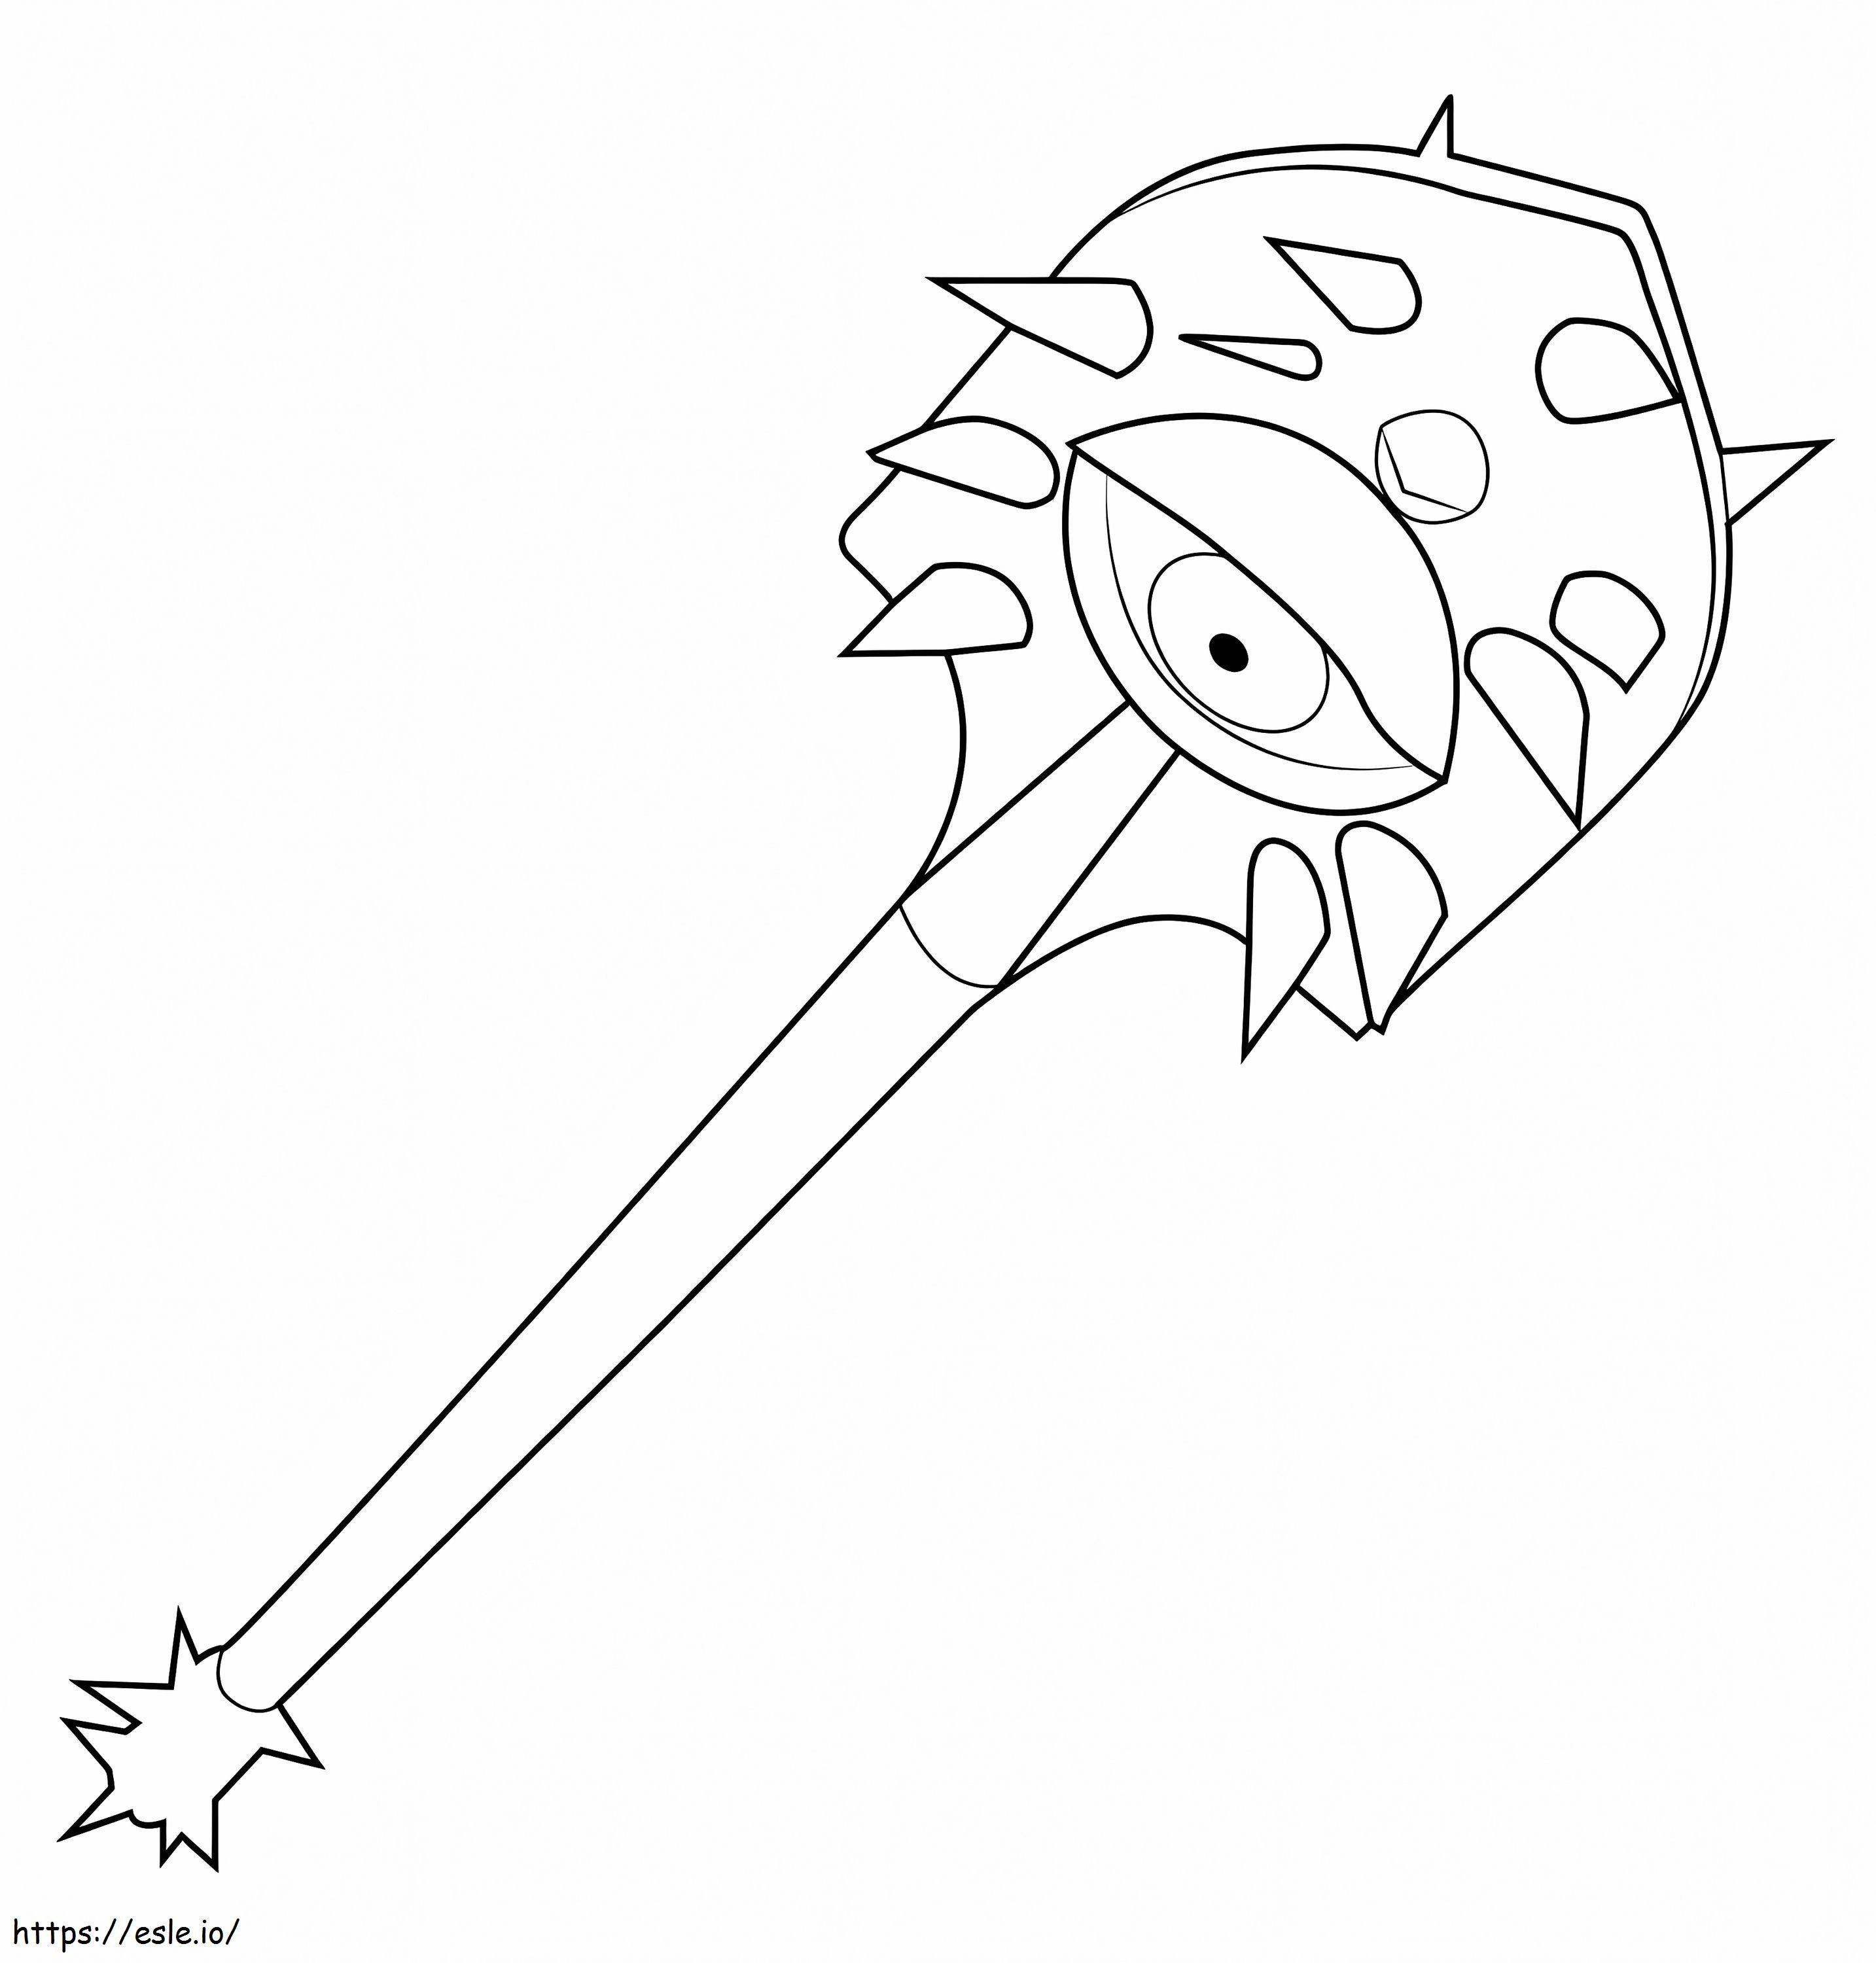 Vision Axe From Fortnite coloring page